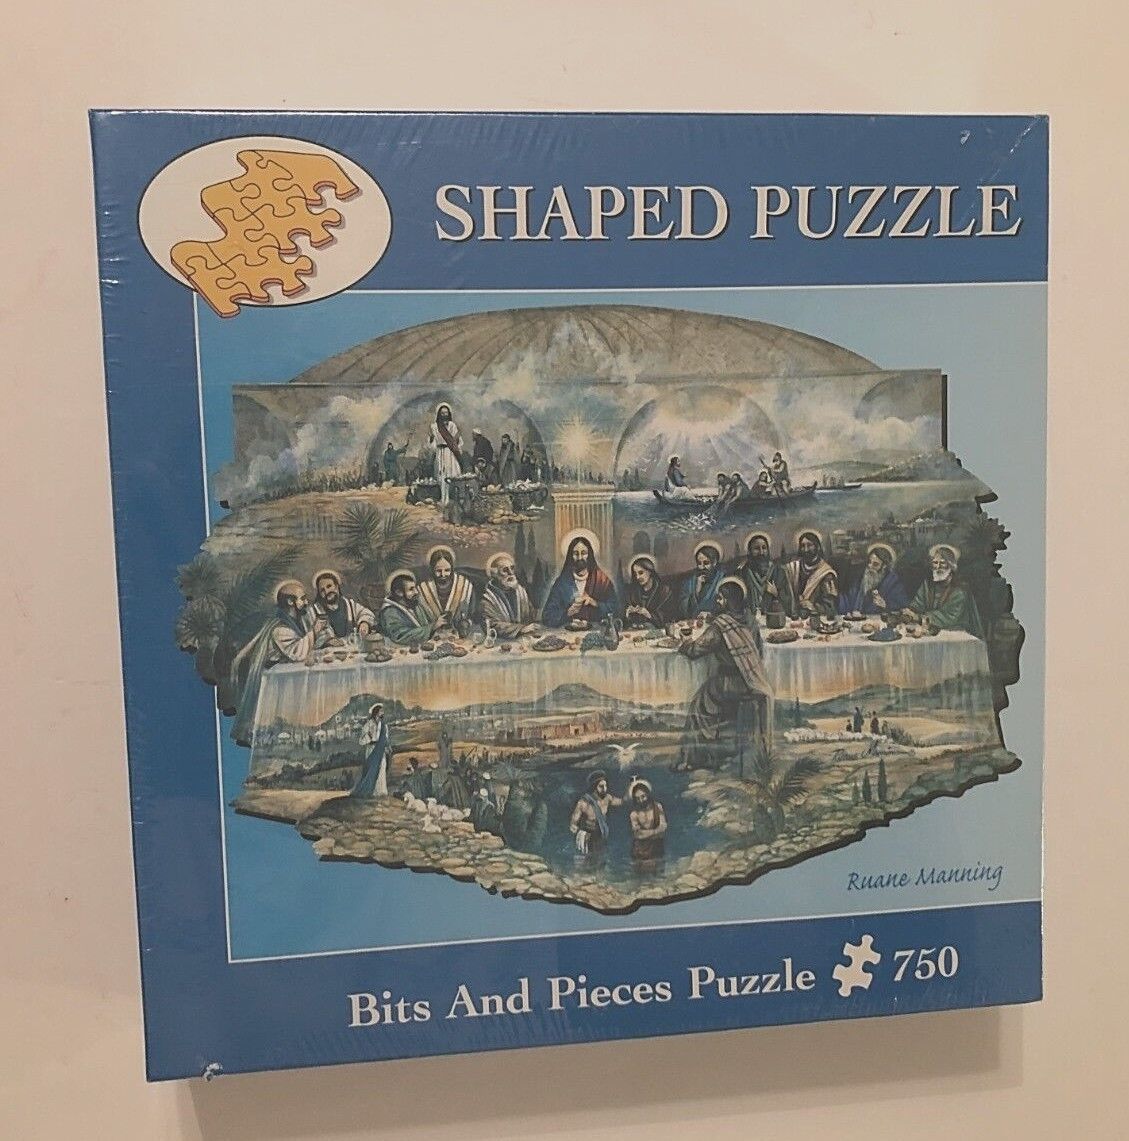 LAST SUPPER Bits and Pieces 750 Jigsaw Puzzle 2004 Ruane Manning 18-0043 New - $19.74